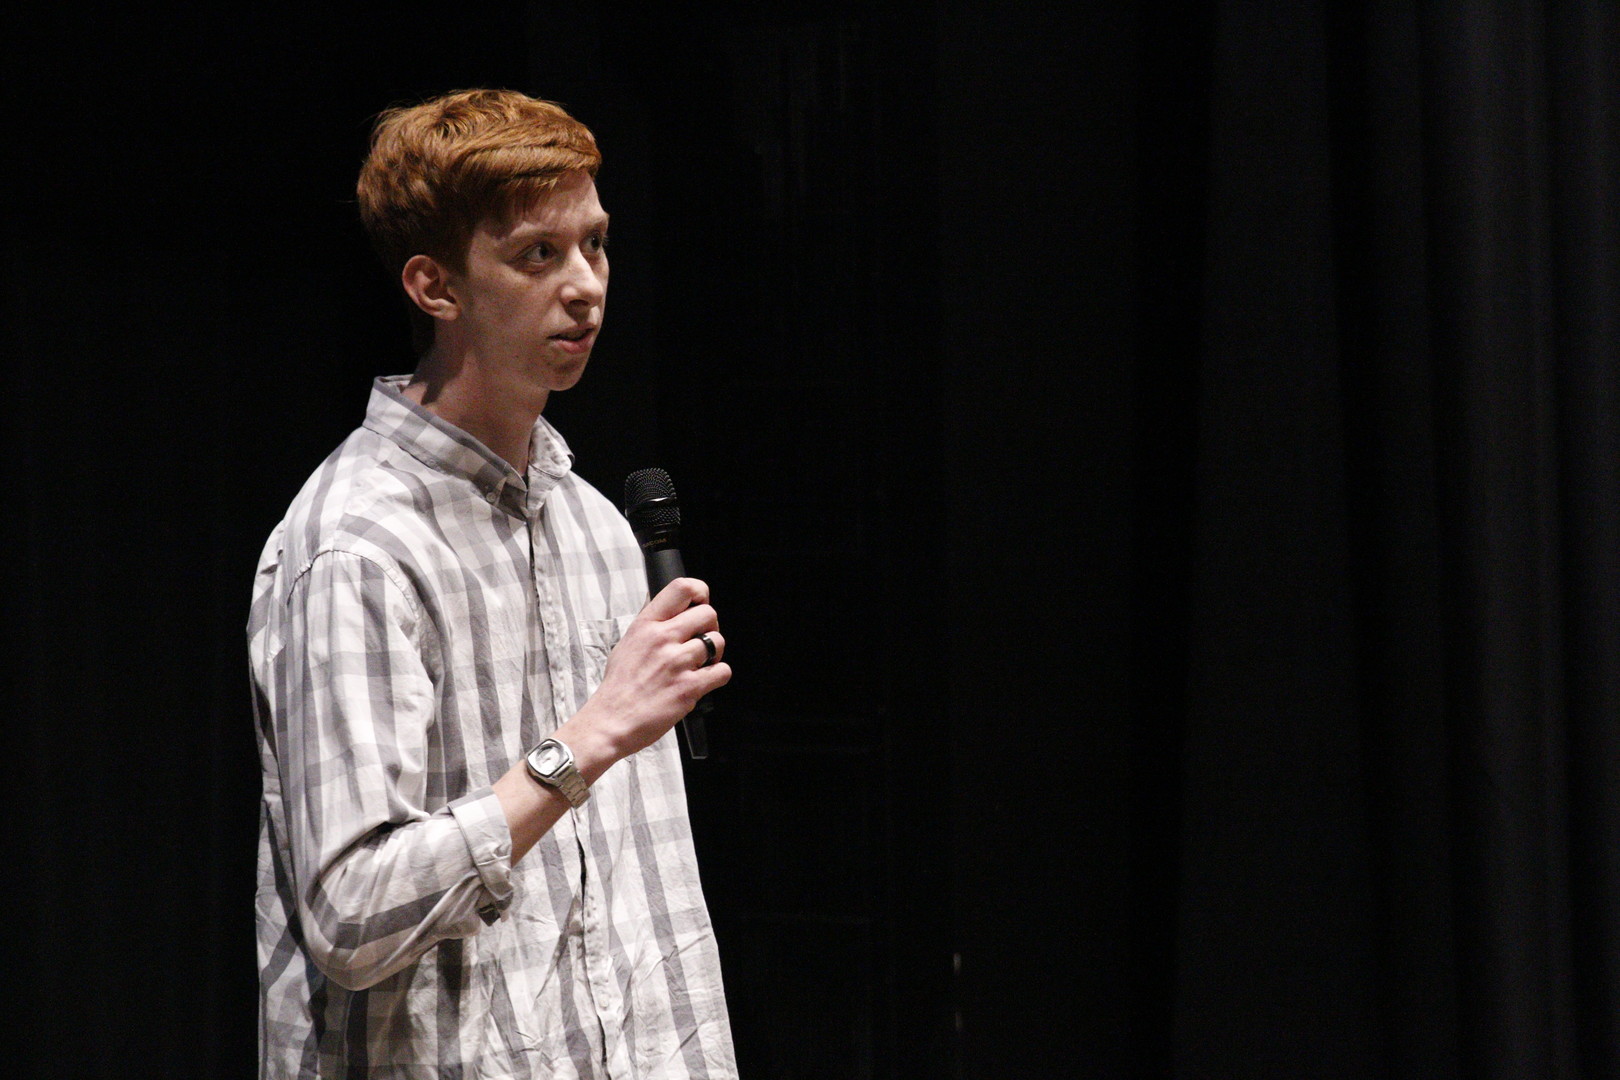 High School student and KUFF participant Justin Freed answers a question